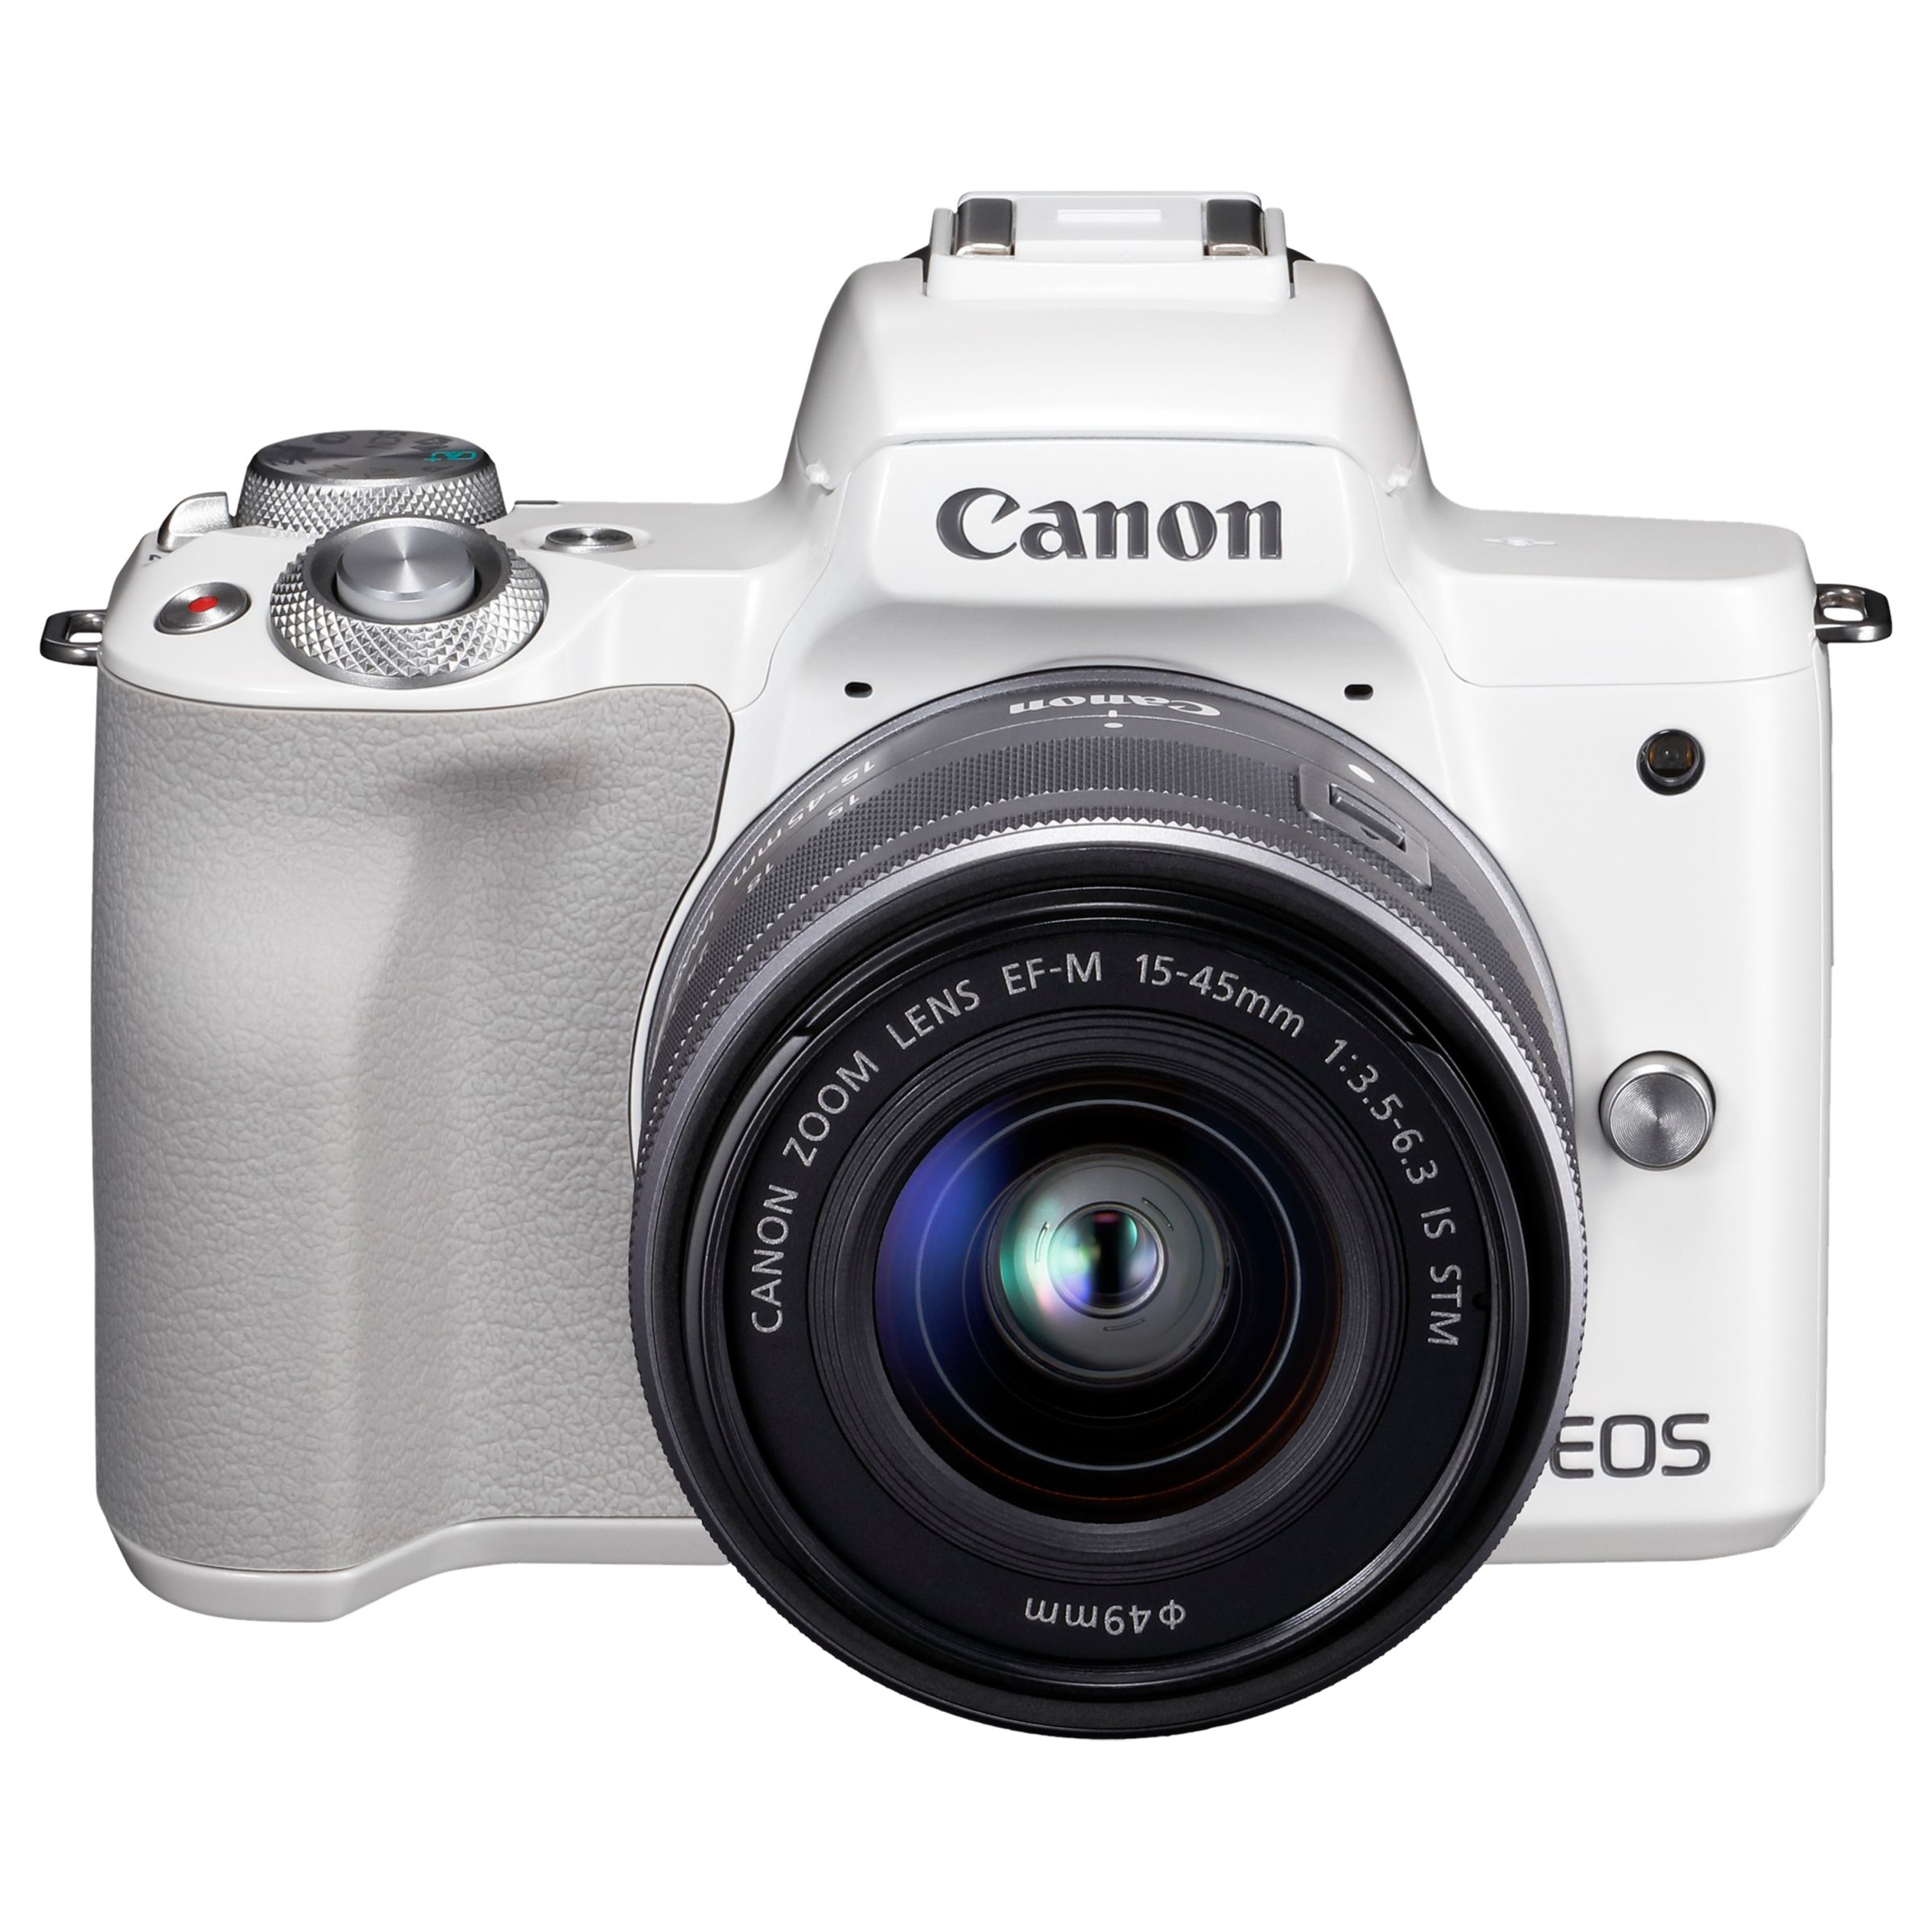 Image of Canon EOS M50 Compact System Camera with EFM 1545mm f3563 IS STM lens 4K Ultra HD 241MP WiFi Bluetooth NFC OLED EVF 3 VariAngle Touch Screen